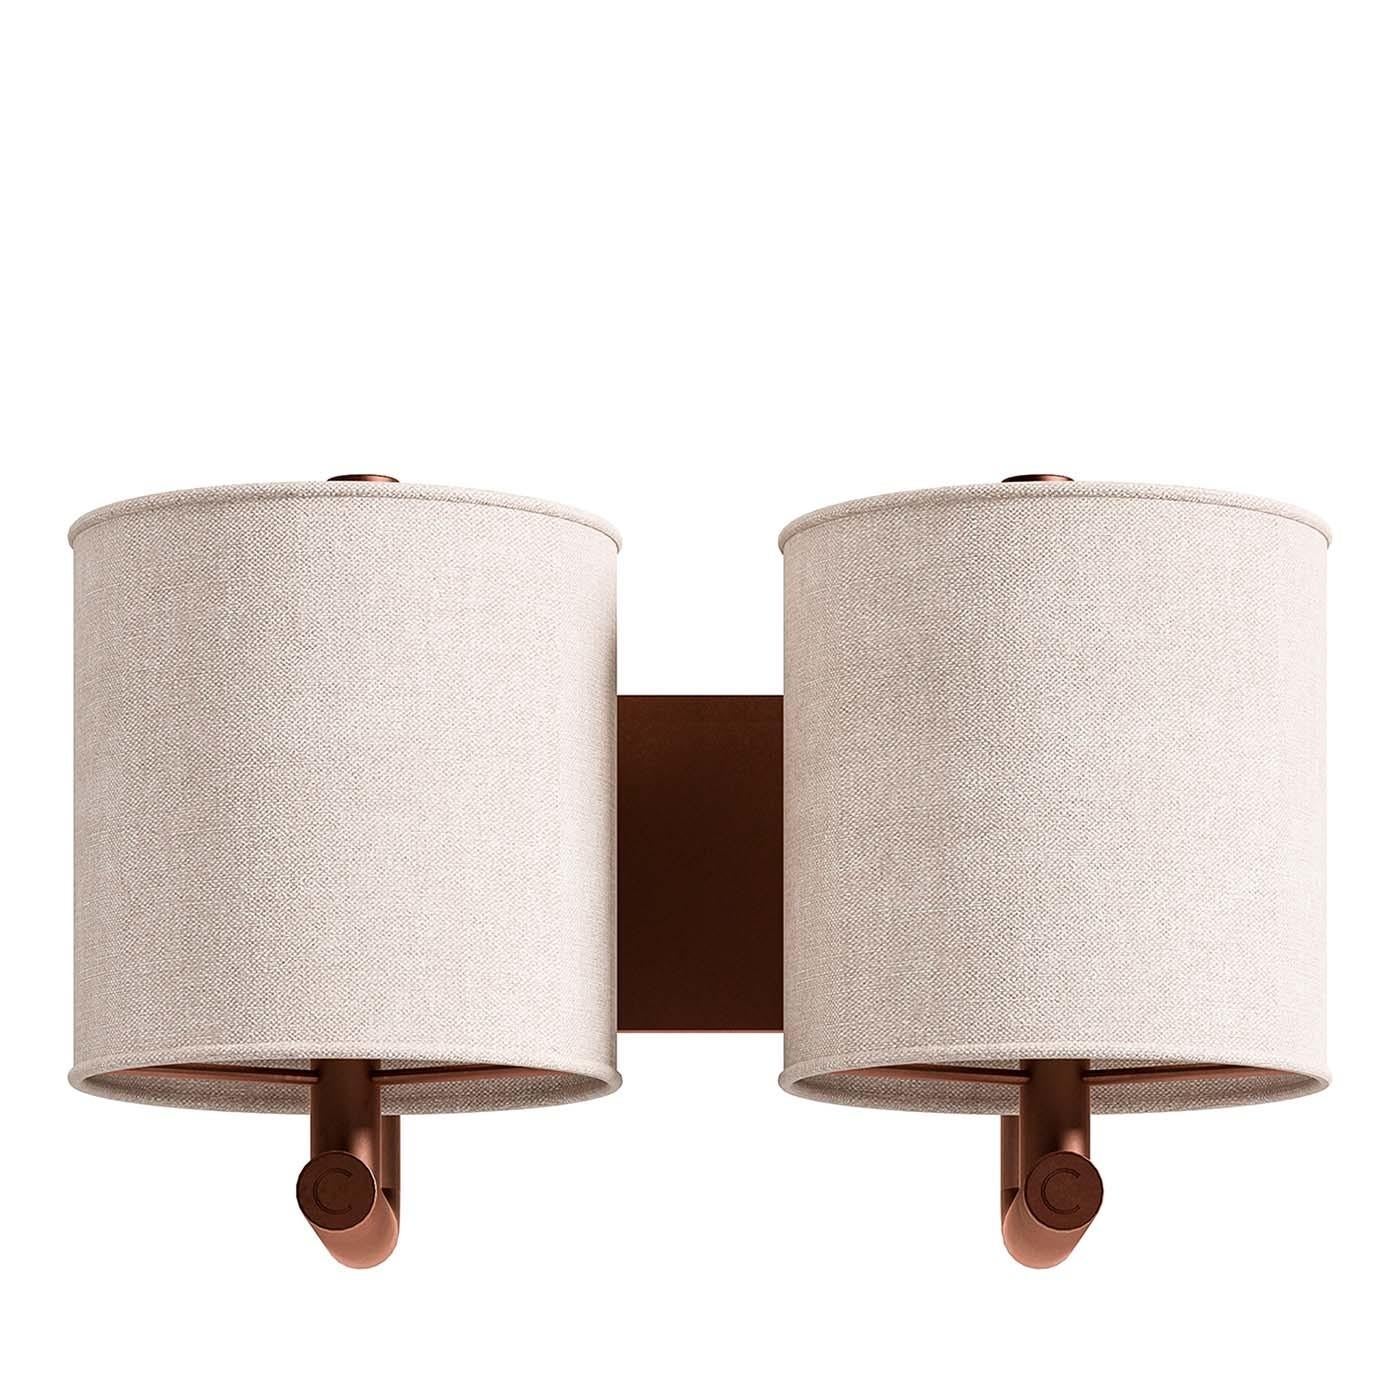 Merging traditional lines with a vintage decorative touch, this wall sconce is a versatile illumination that will fit in a traditional and midcentury decor. Two curved arms extend from a rectangular wall plate in metal with a brushed-copper finish,